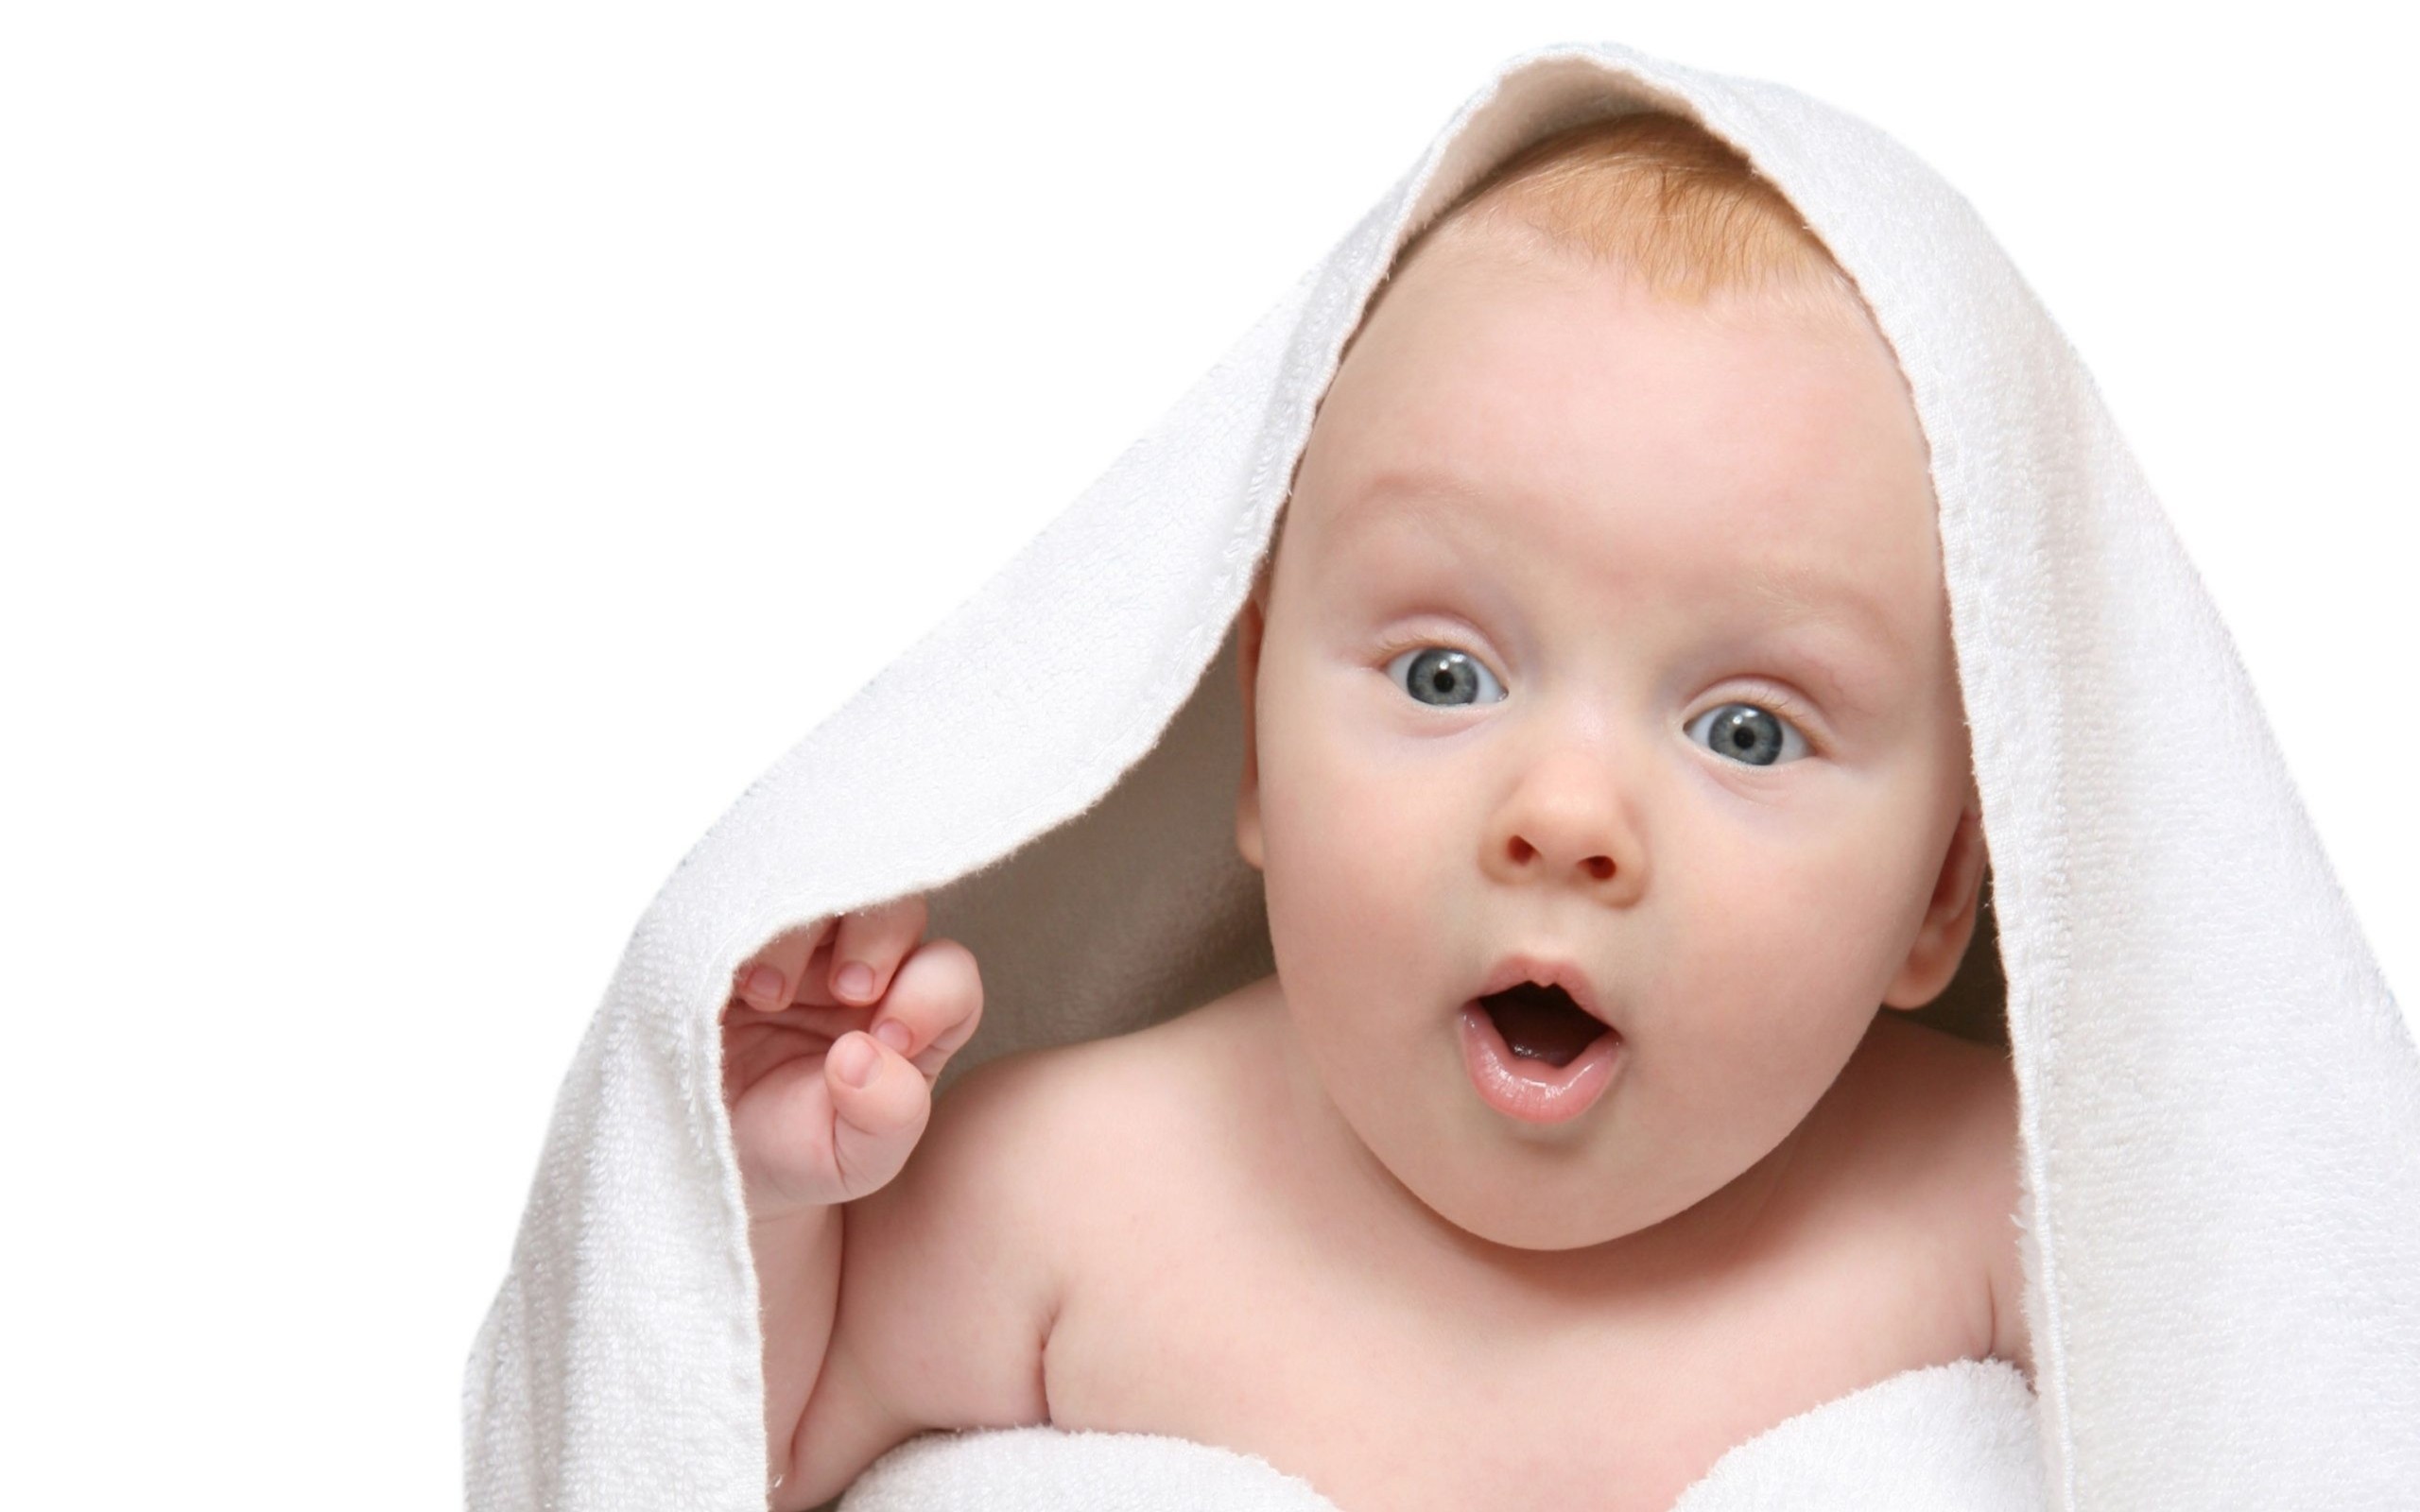 Cute Baby Wallpapers Hd Pictures Download - Surprise Child , HD Wallpaper & Backgrounds